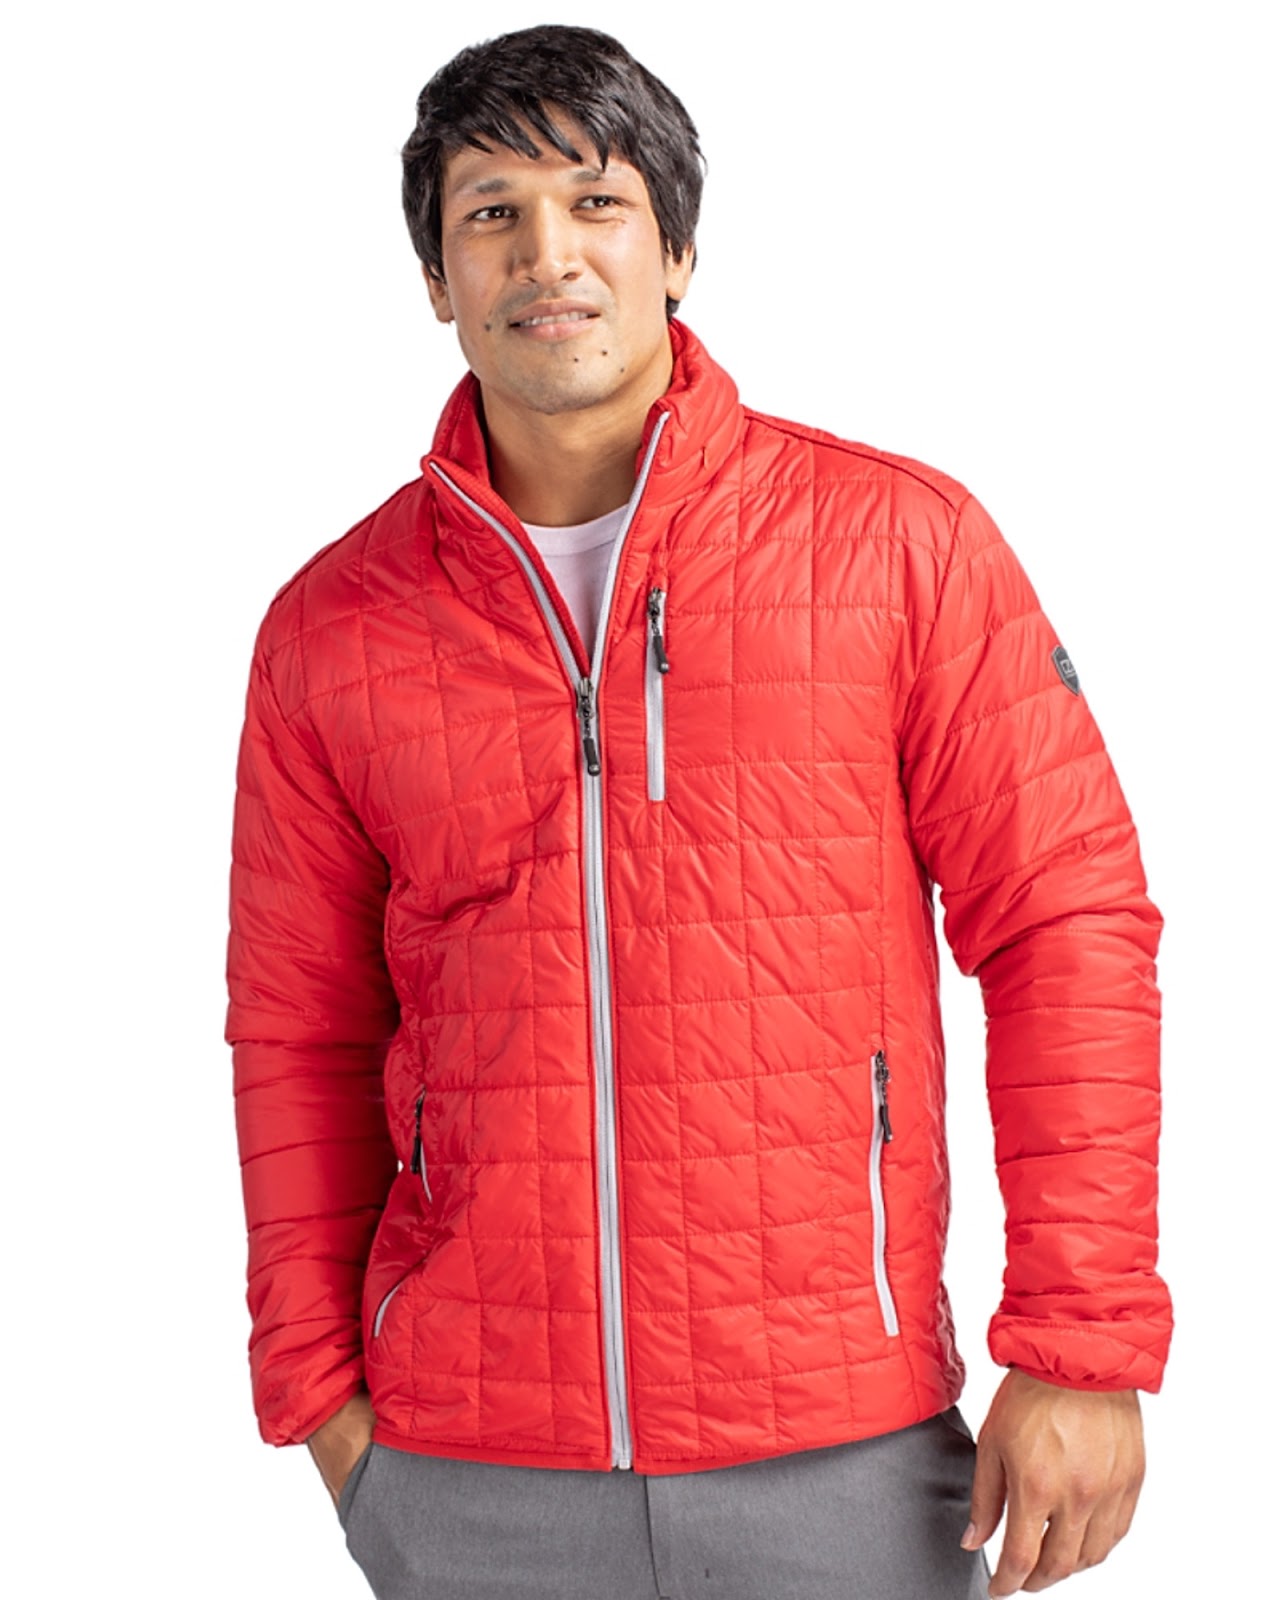 Insulated Full Zip Men's Puffer Jacket for wind & water protection while skiing